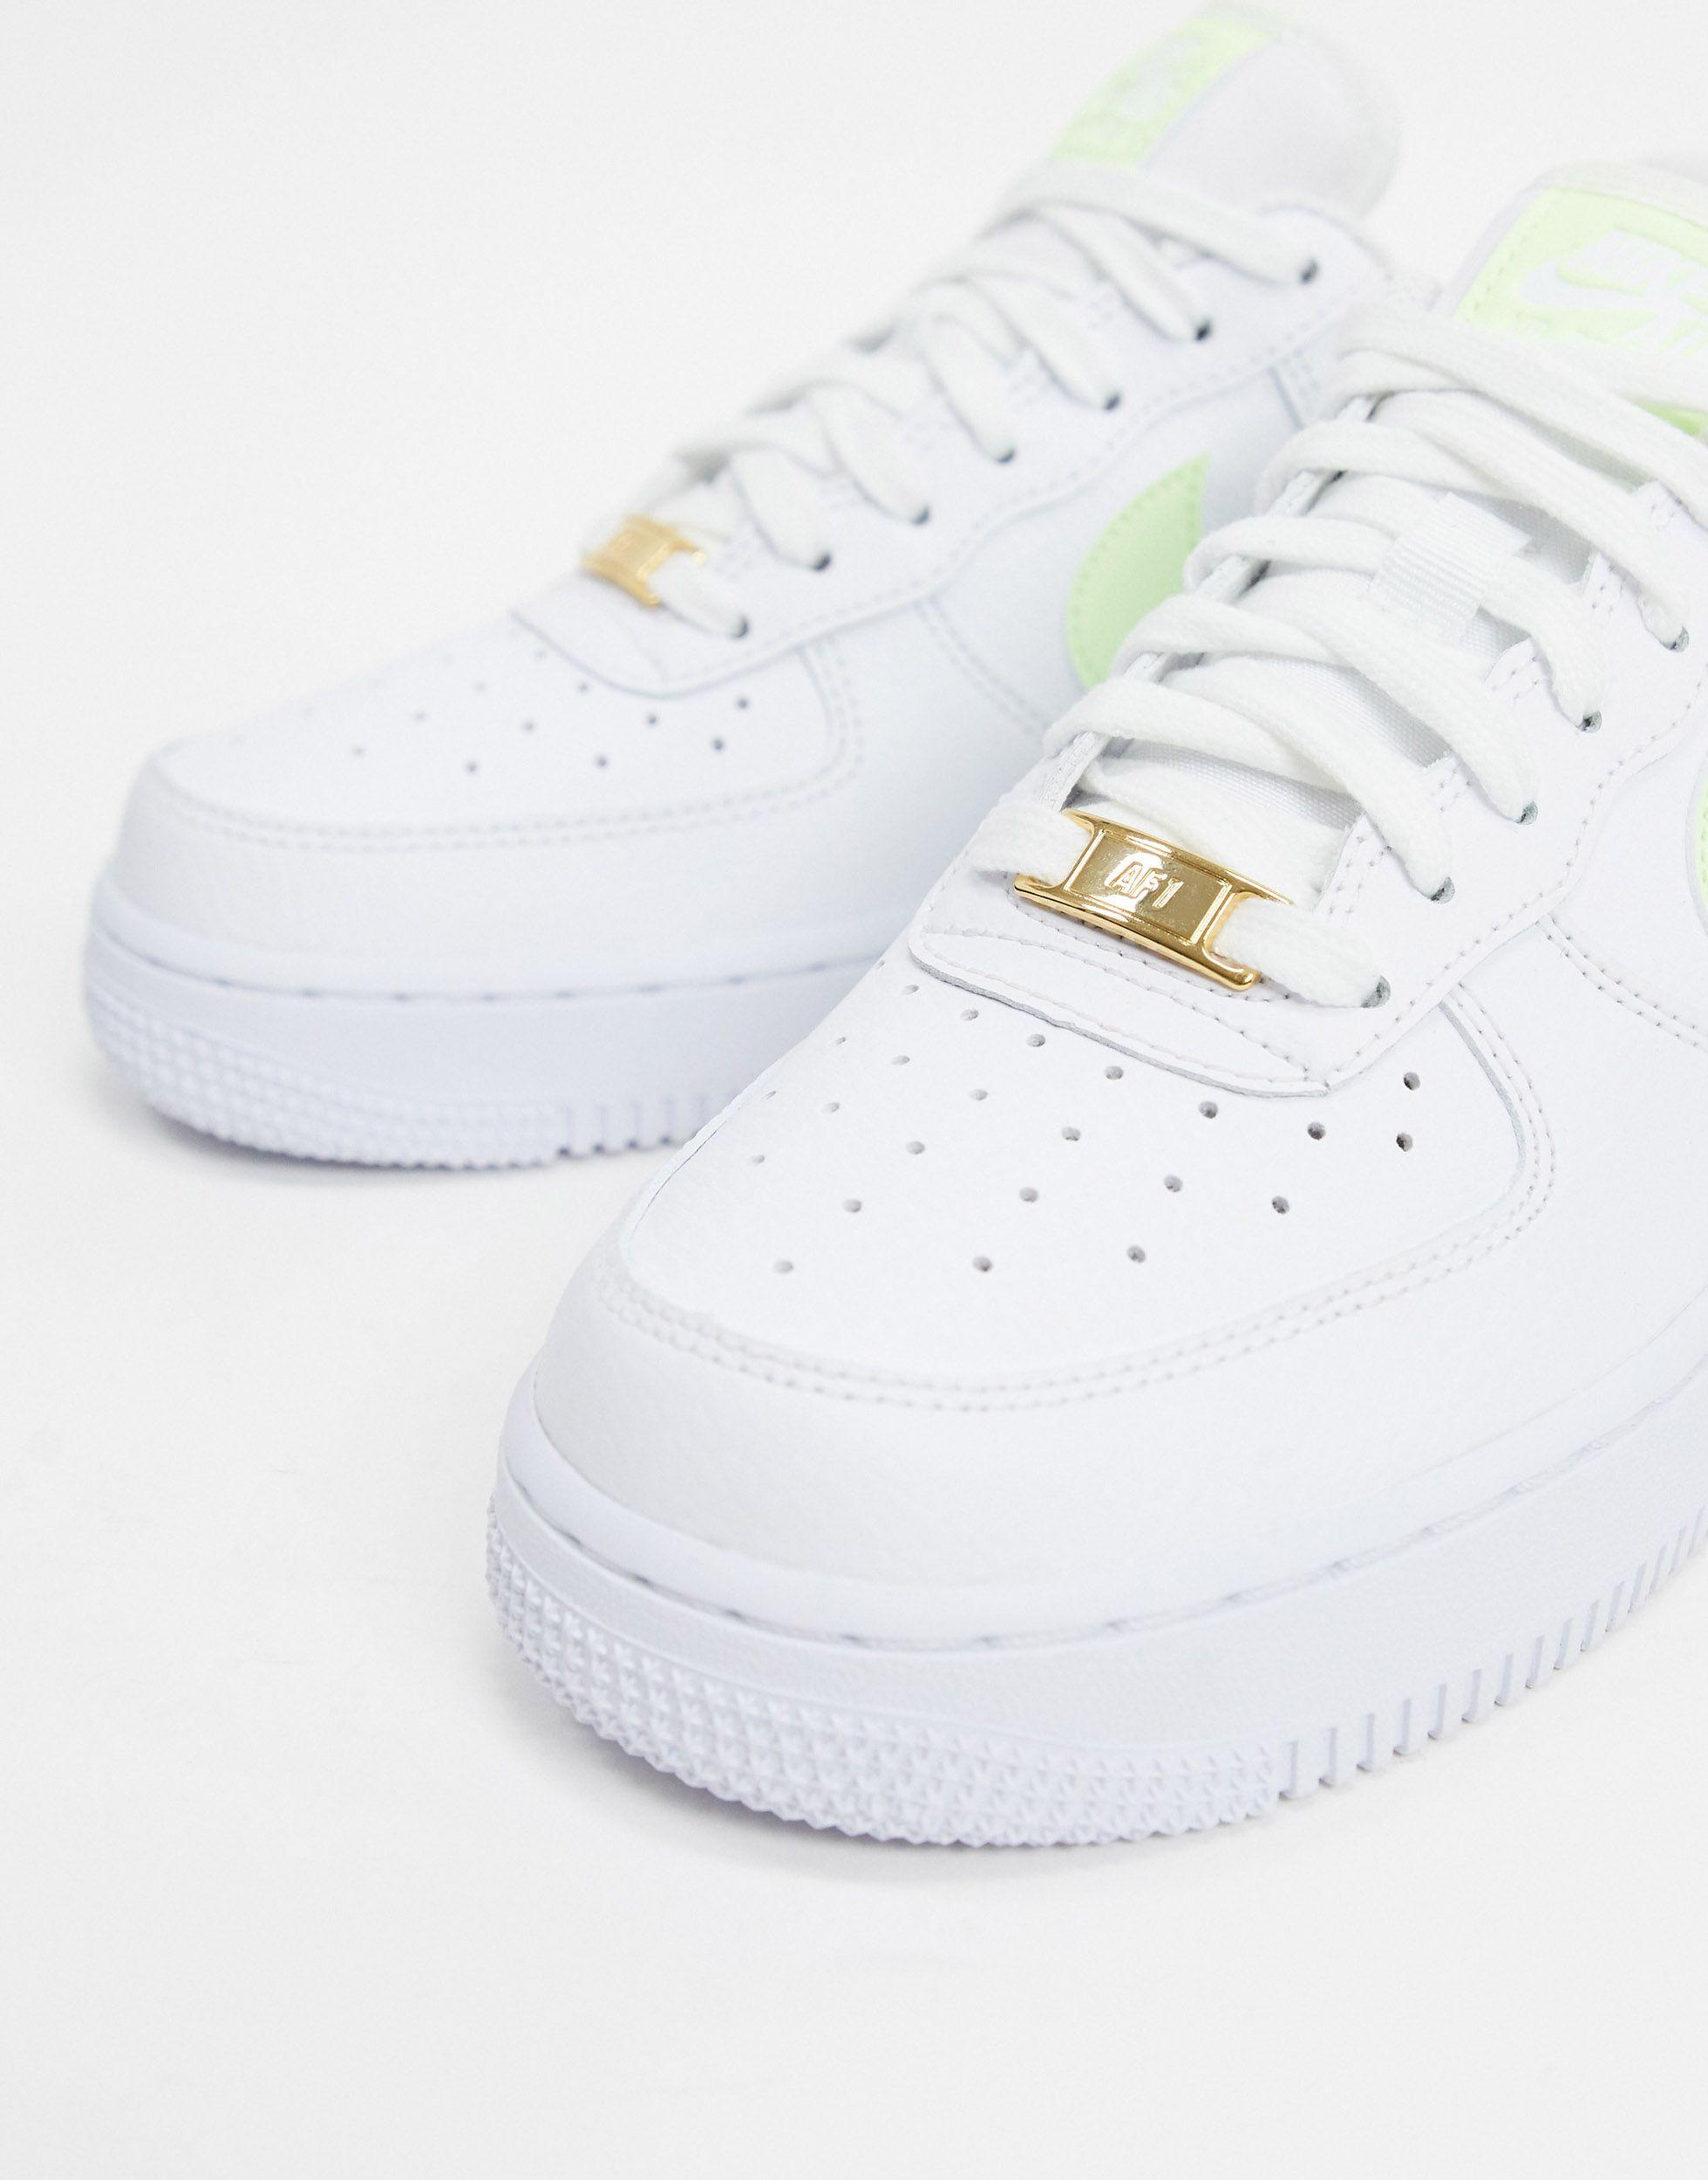 air force 1 nike jaune fluo